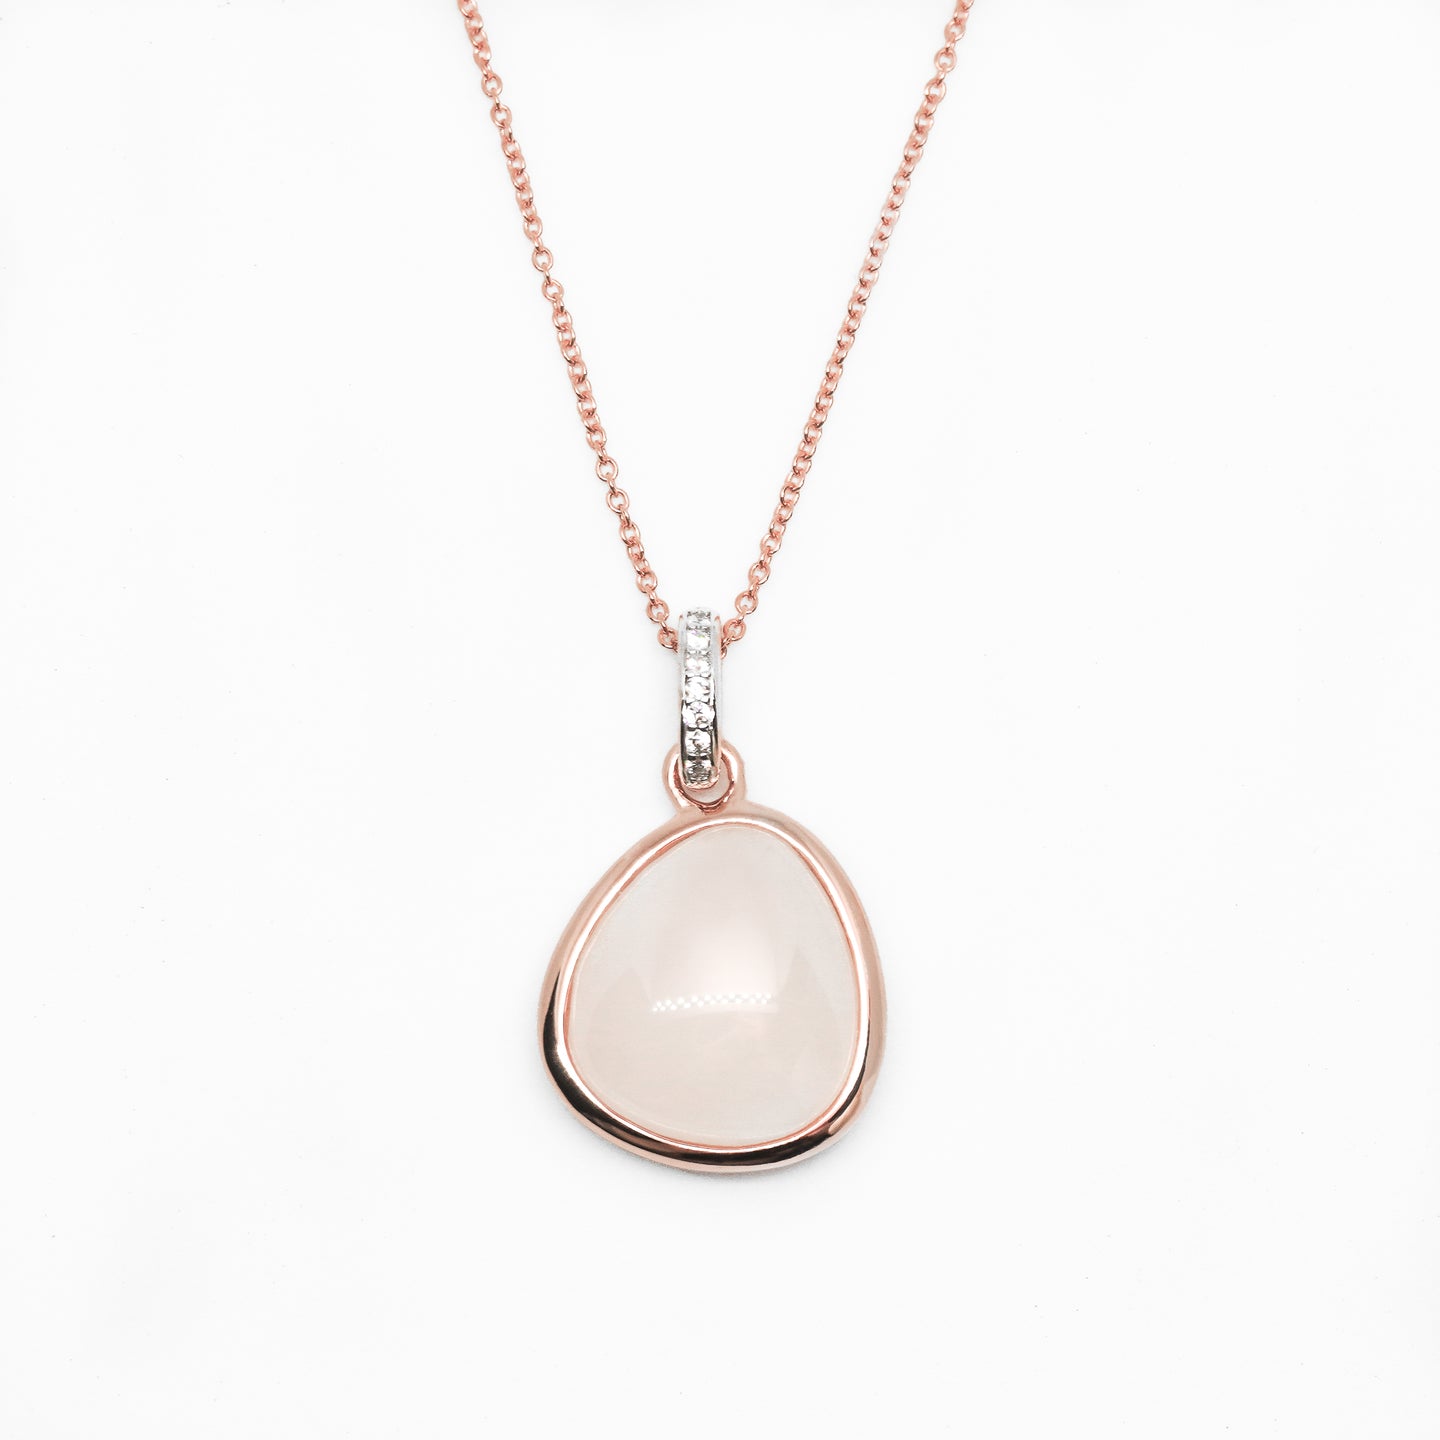 Agate Crystal Necklace | Rose Gold Vermeil on 925 Sterling Silver